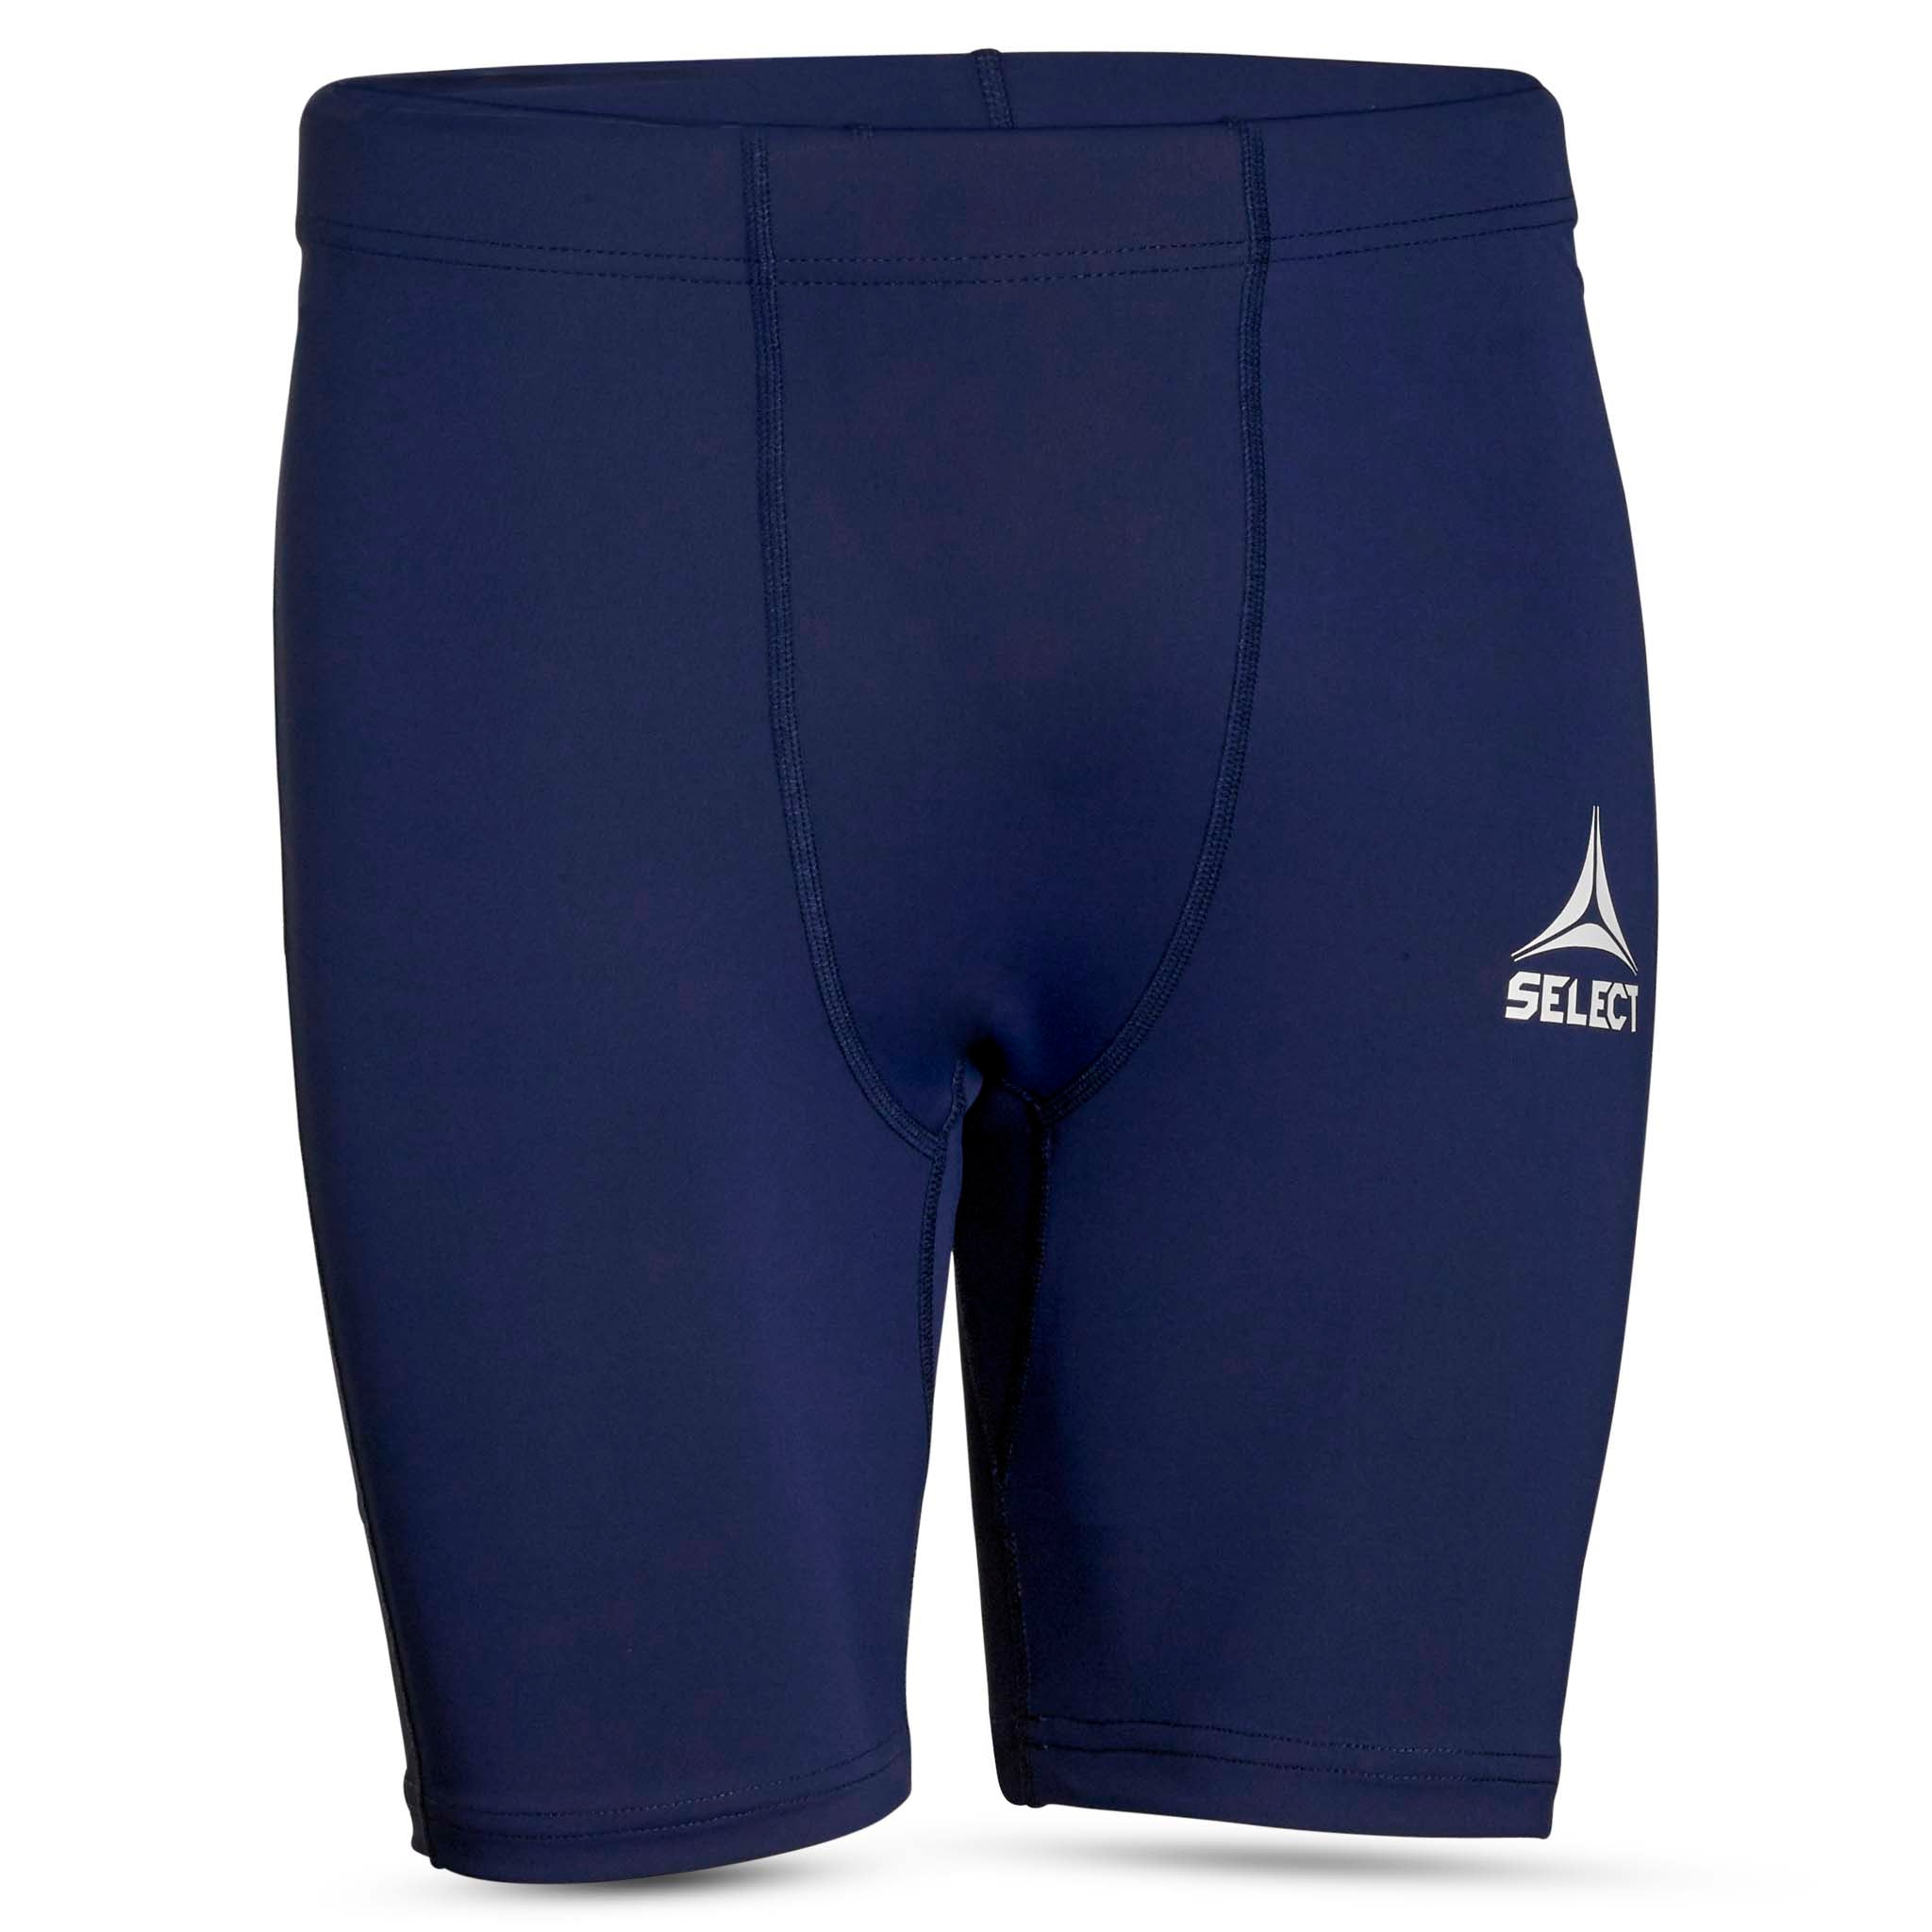 Why Choose Compression Clothing?